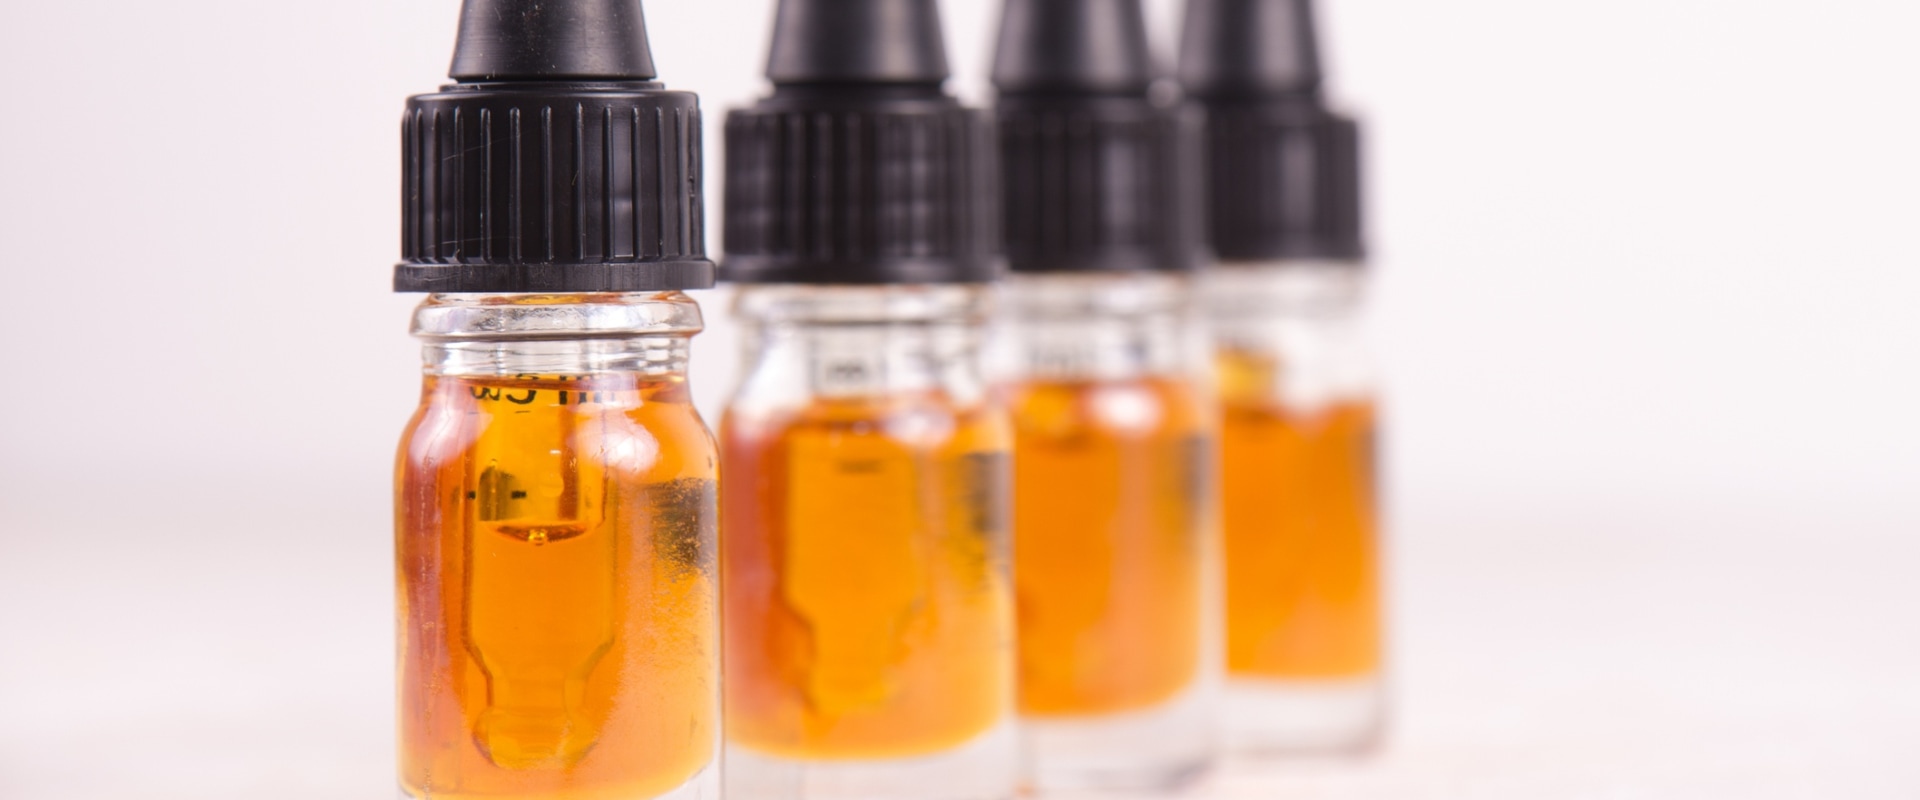 Is CBD Generally Recognized as Safe?